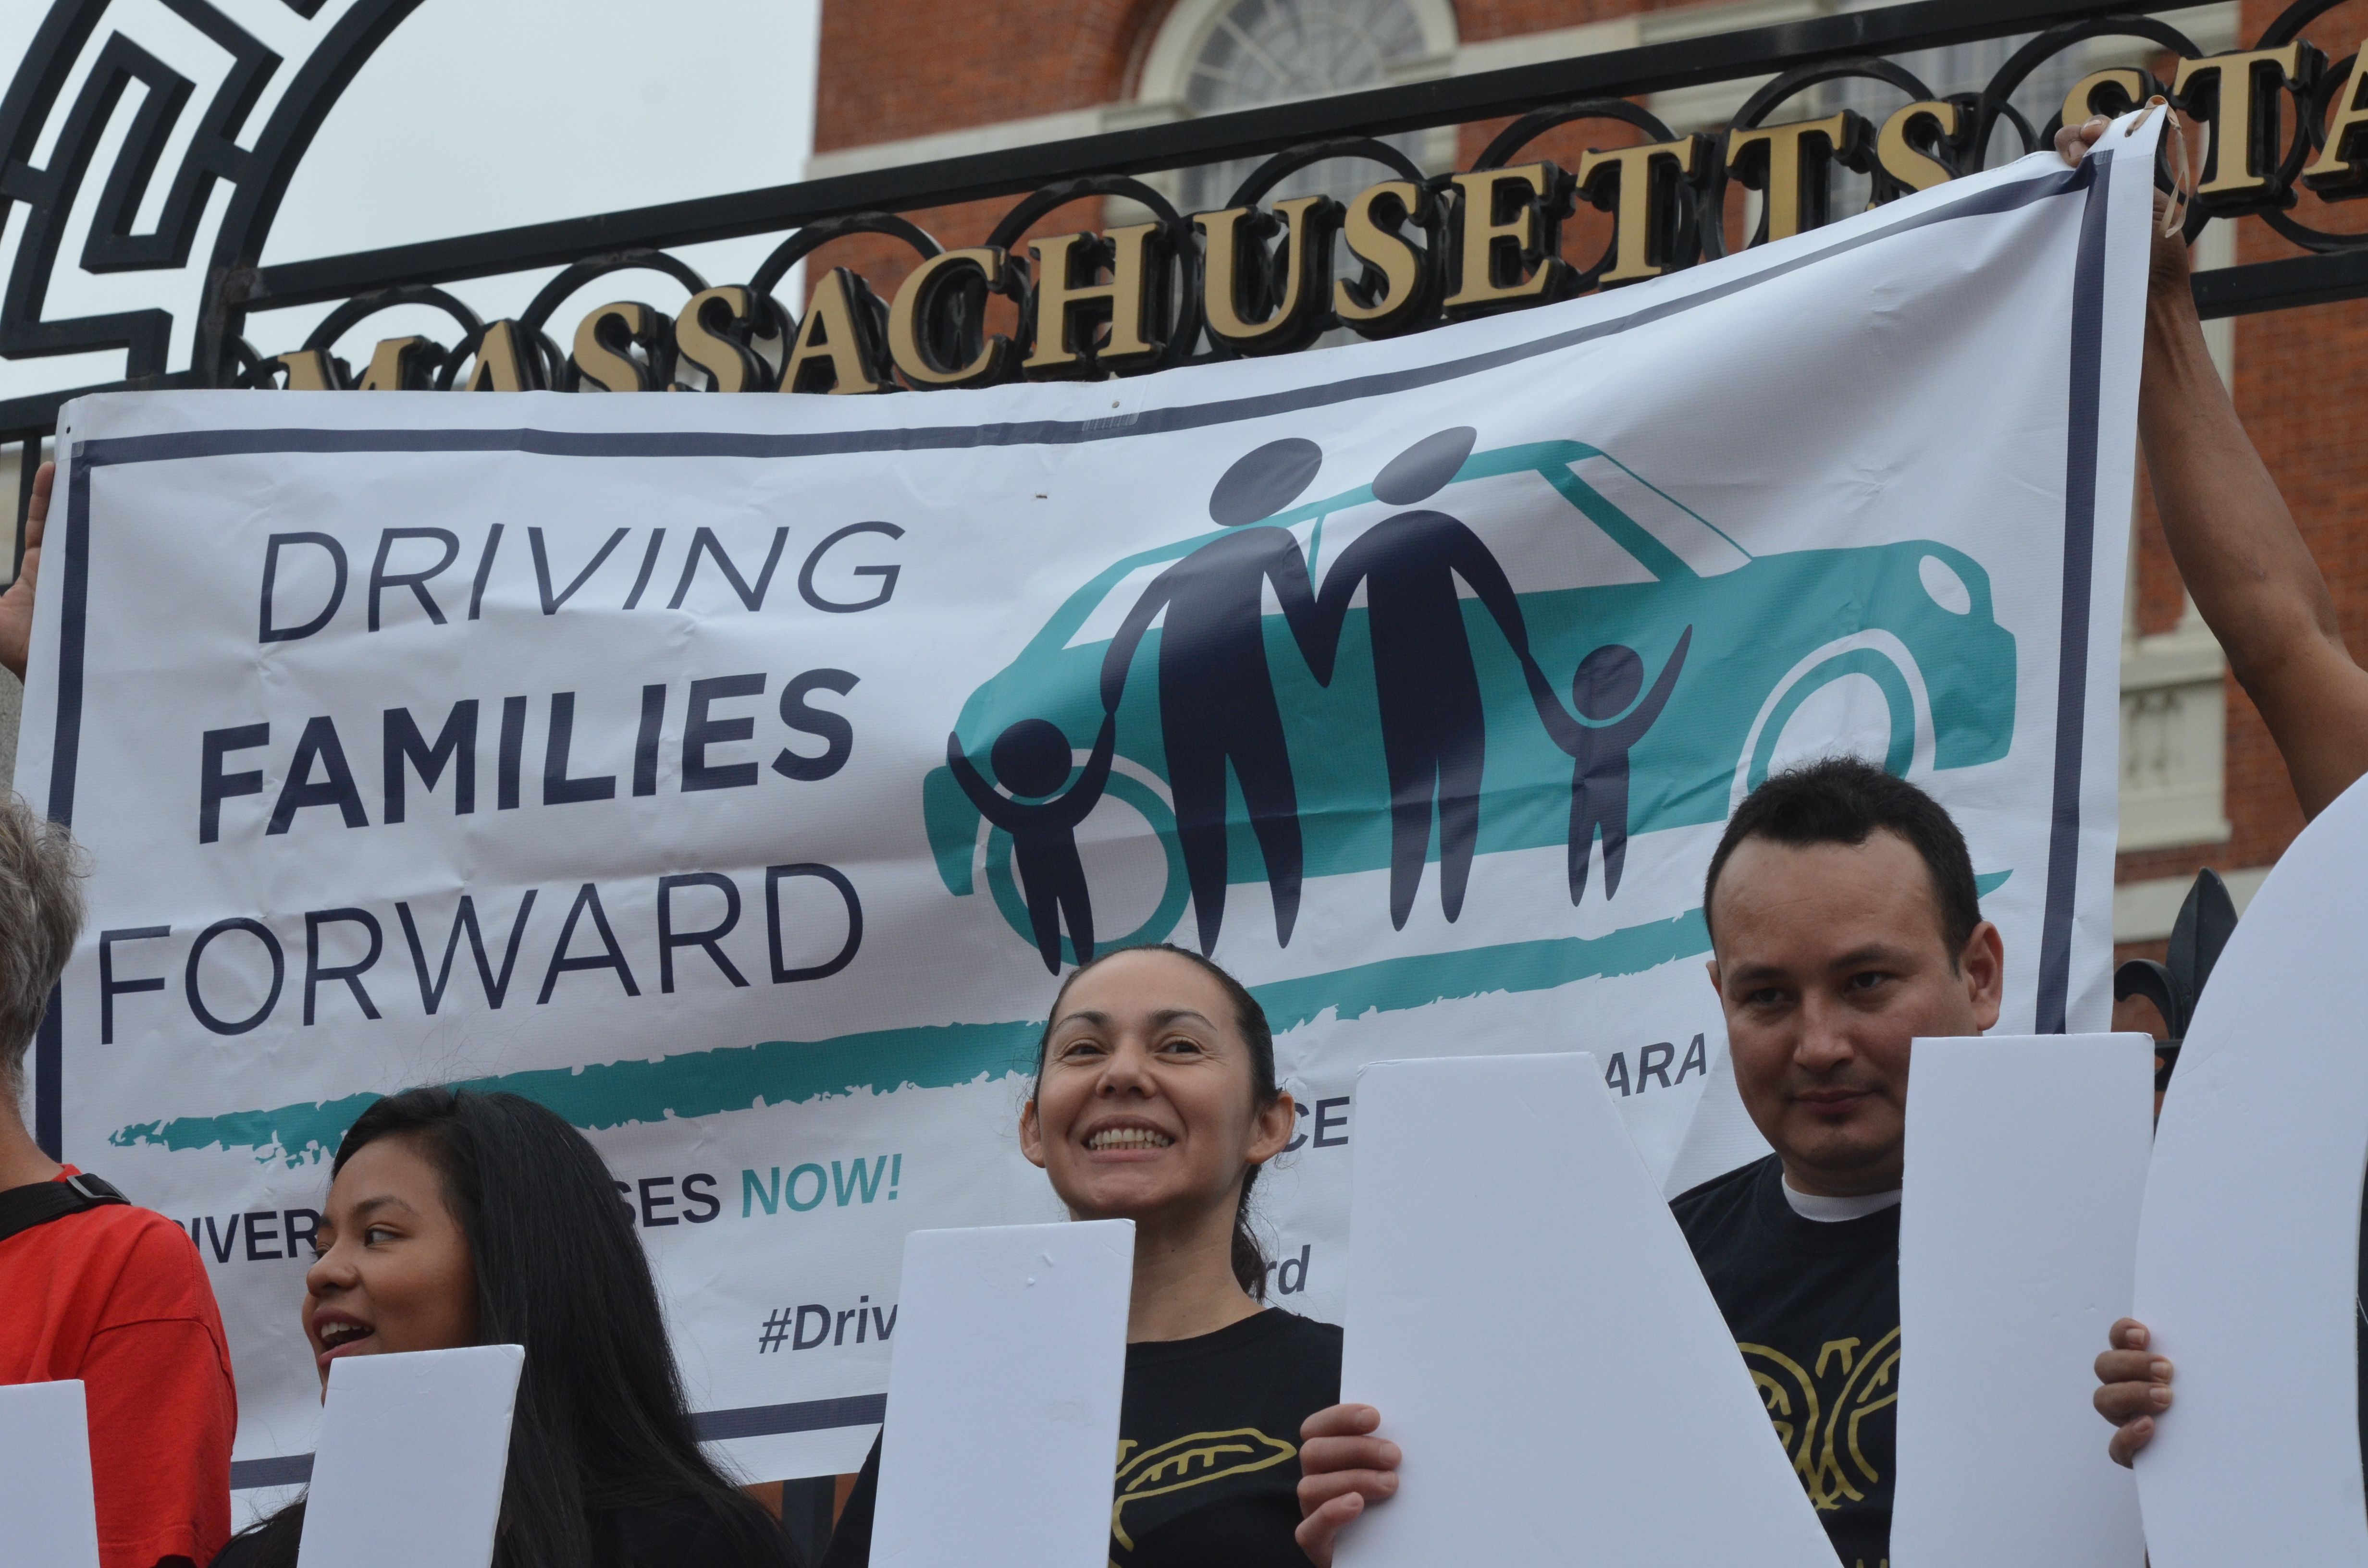 Welcome Table Assists Immigrants with Driver License Applications in  Pittsfield /  - The Berkshires online guide to events, news  and Berkshire County community information.